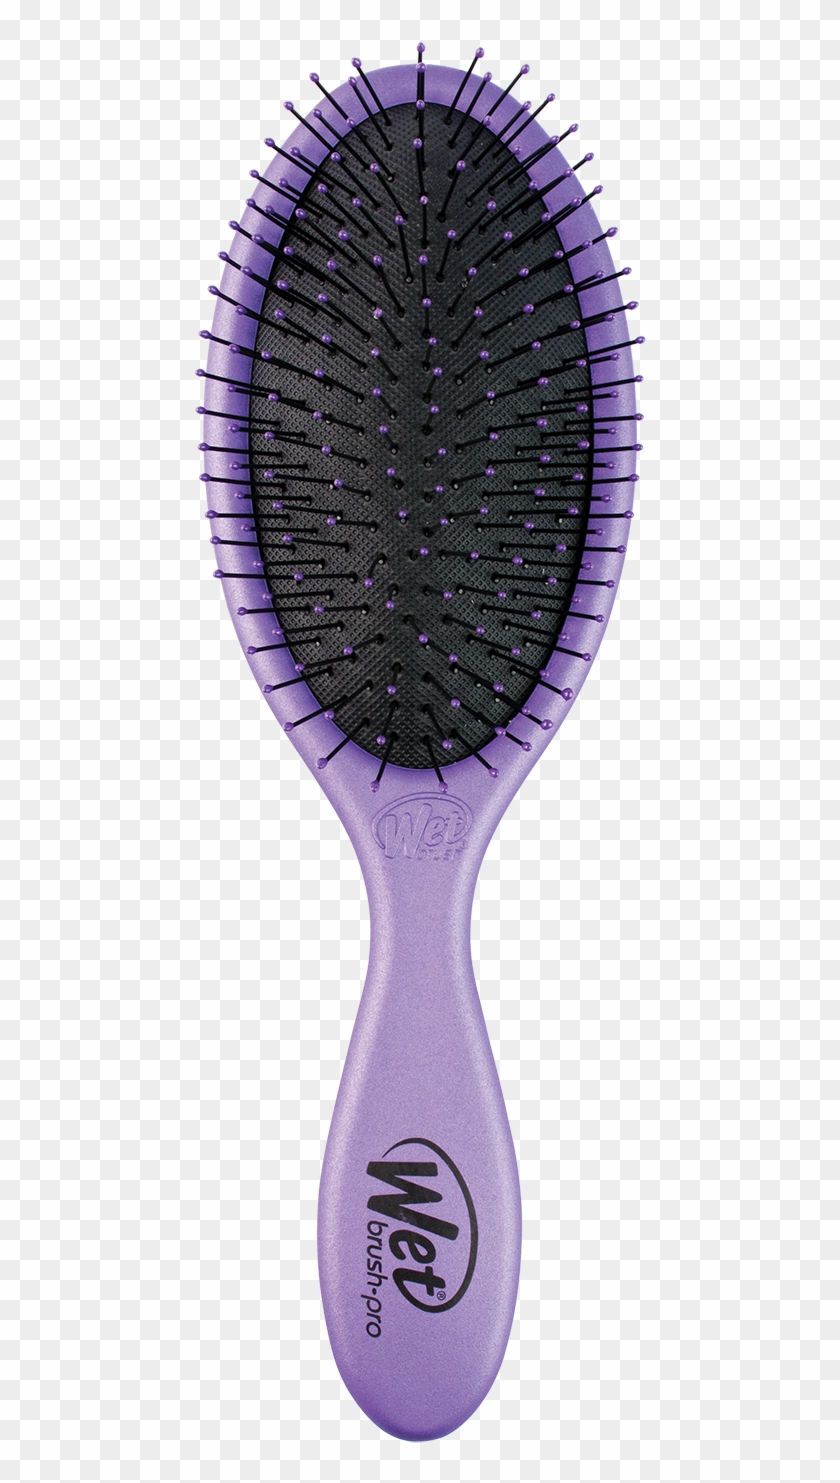 Shampoo Clipart Hair Brush Comb - Wet Brush - Png Download #3871271